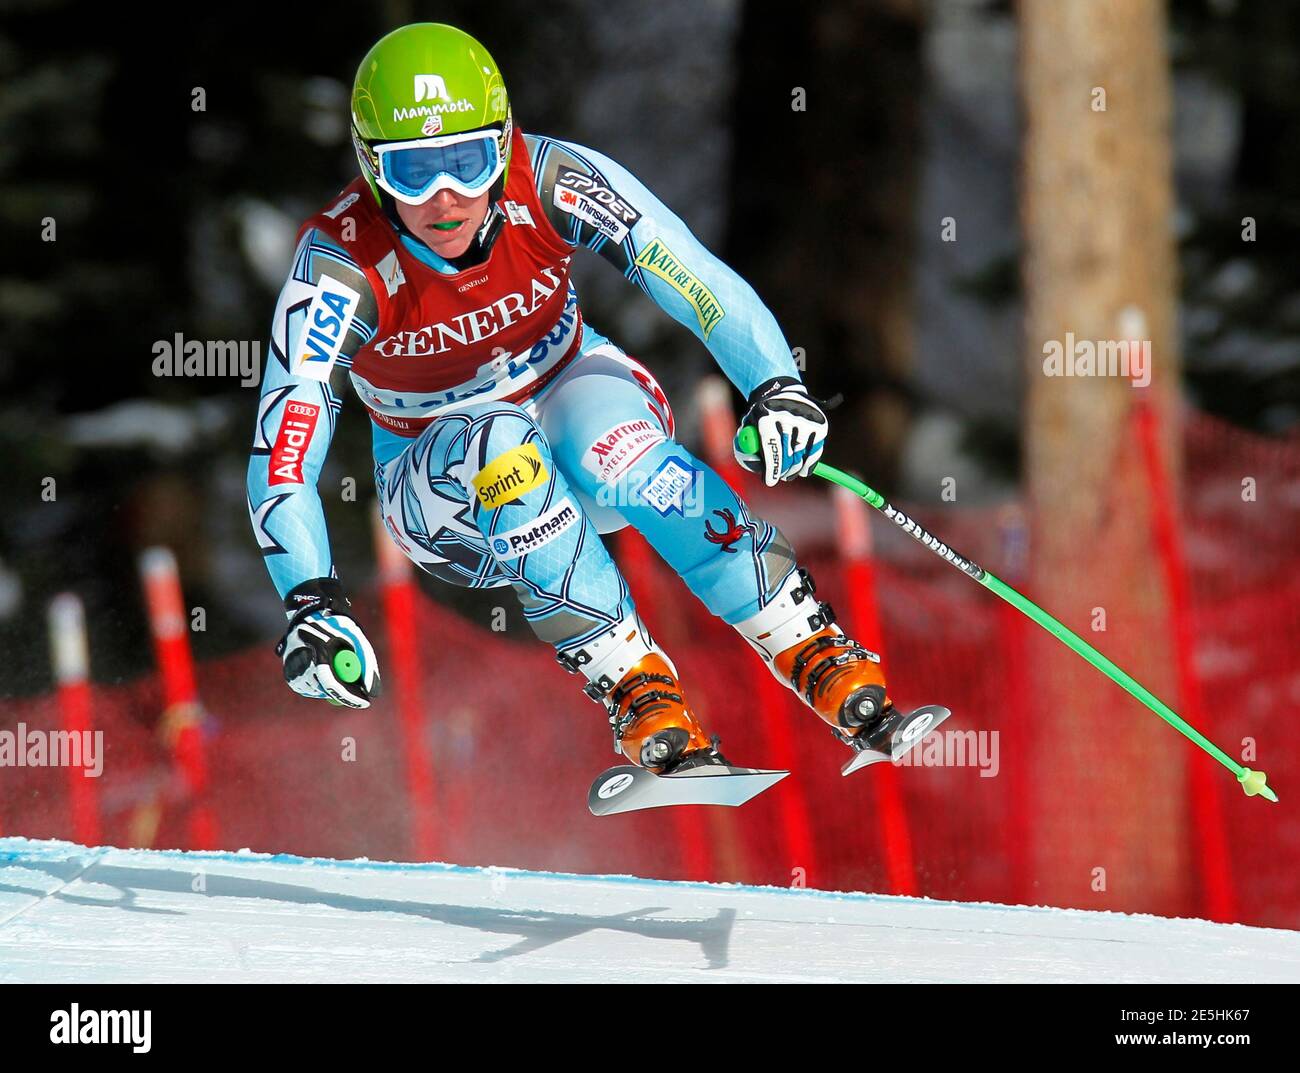 Stacey Cook of the U.S. makes as turn during the Women's World Cup downhill alpine skiing race in Lake Louise, Alberta December 2, 2011.  REUTERS/Mike Blake   (CANADA - Tags: SPORT SKIING) Stock Photo